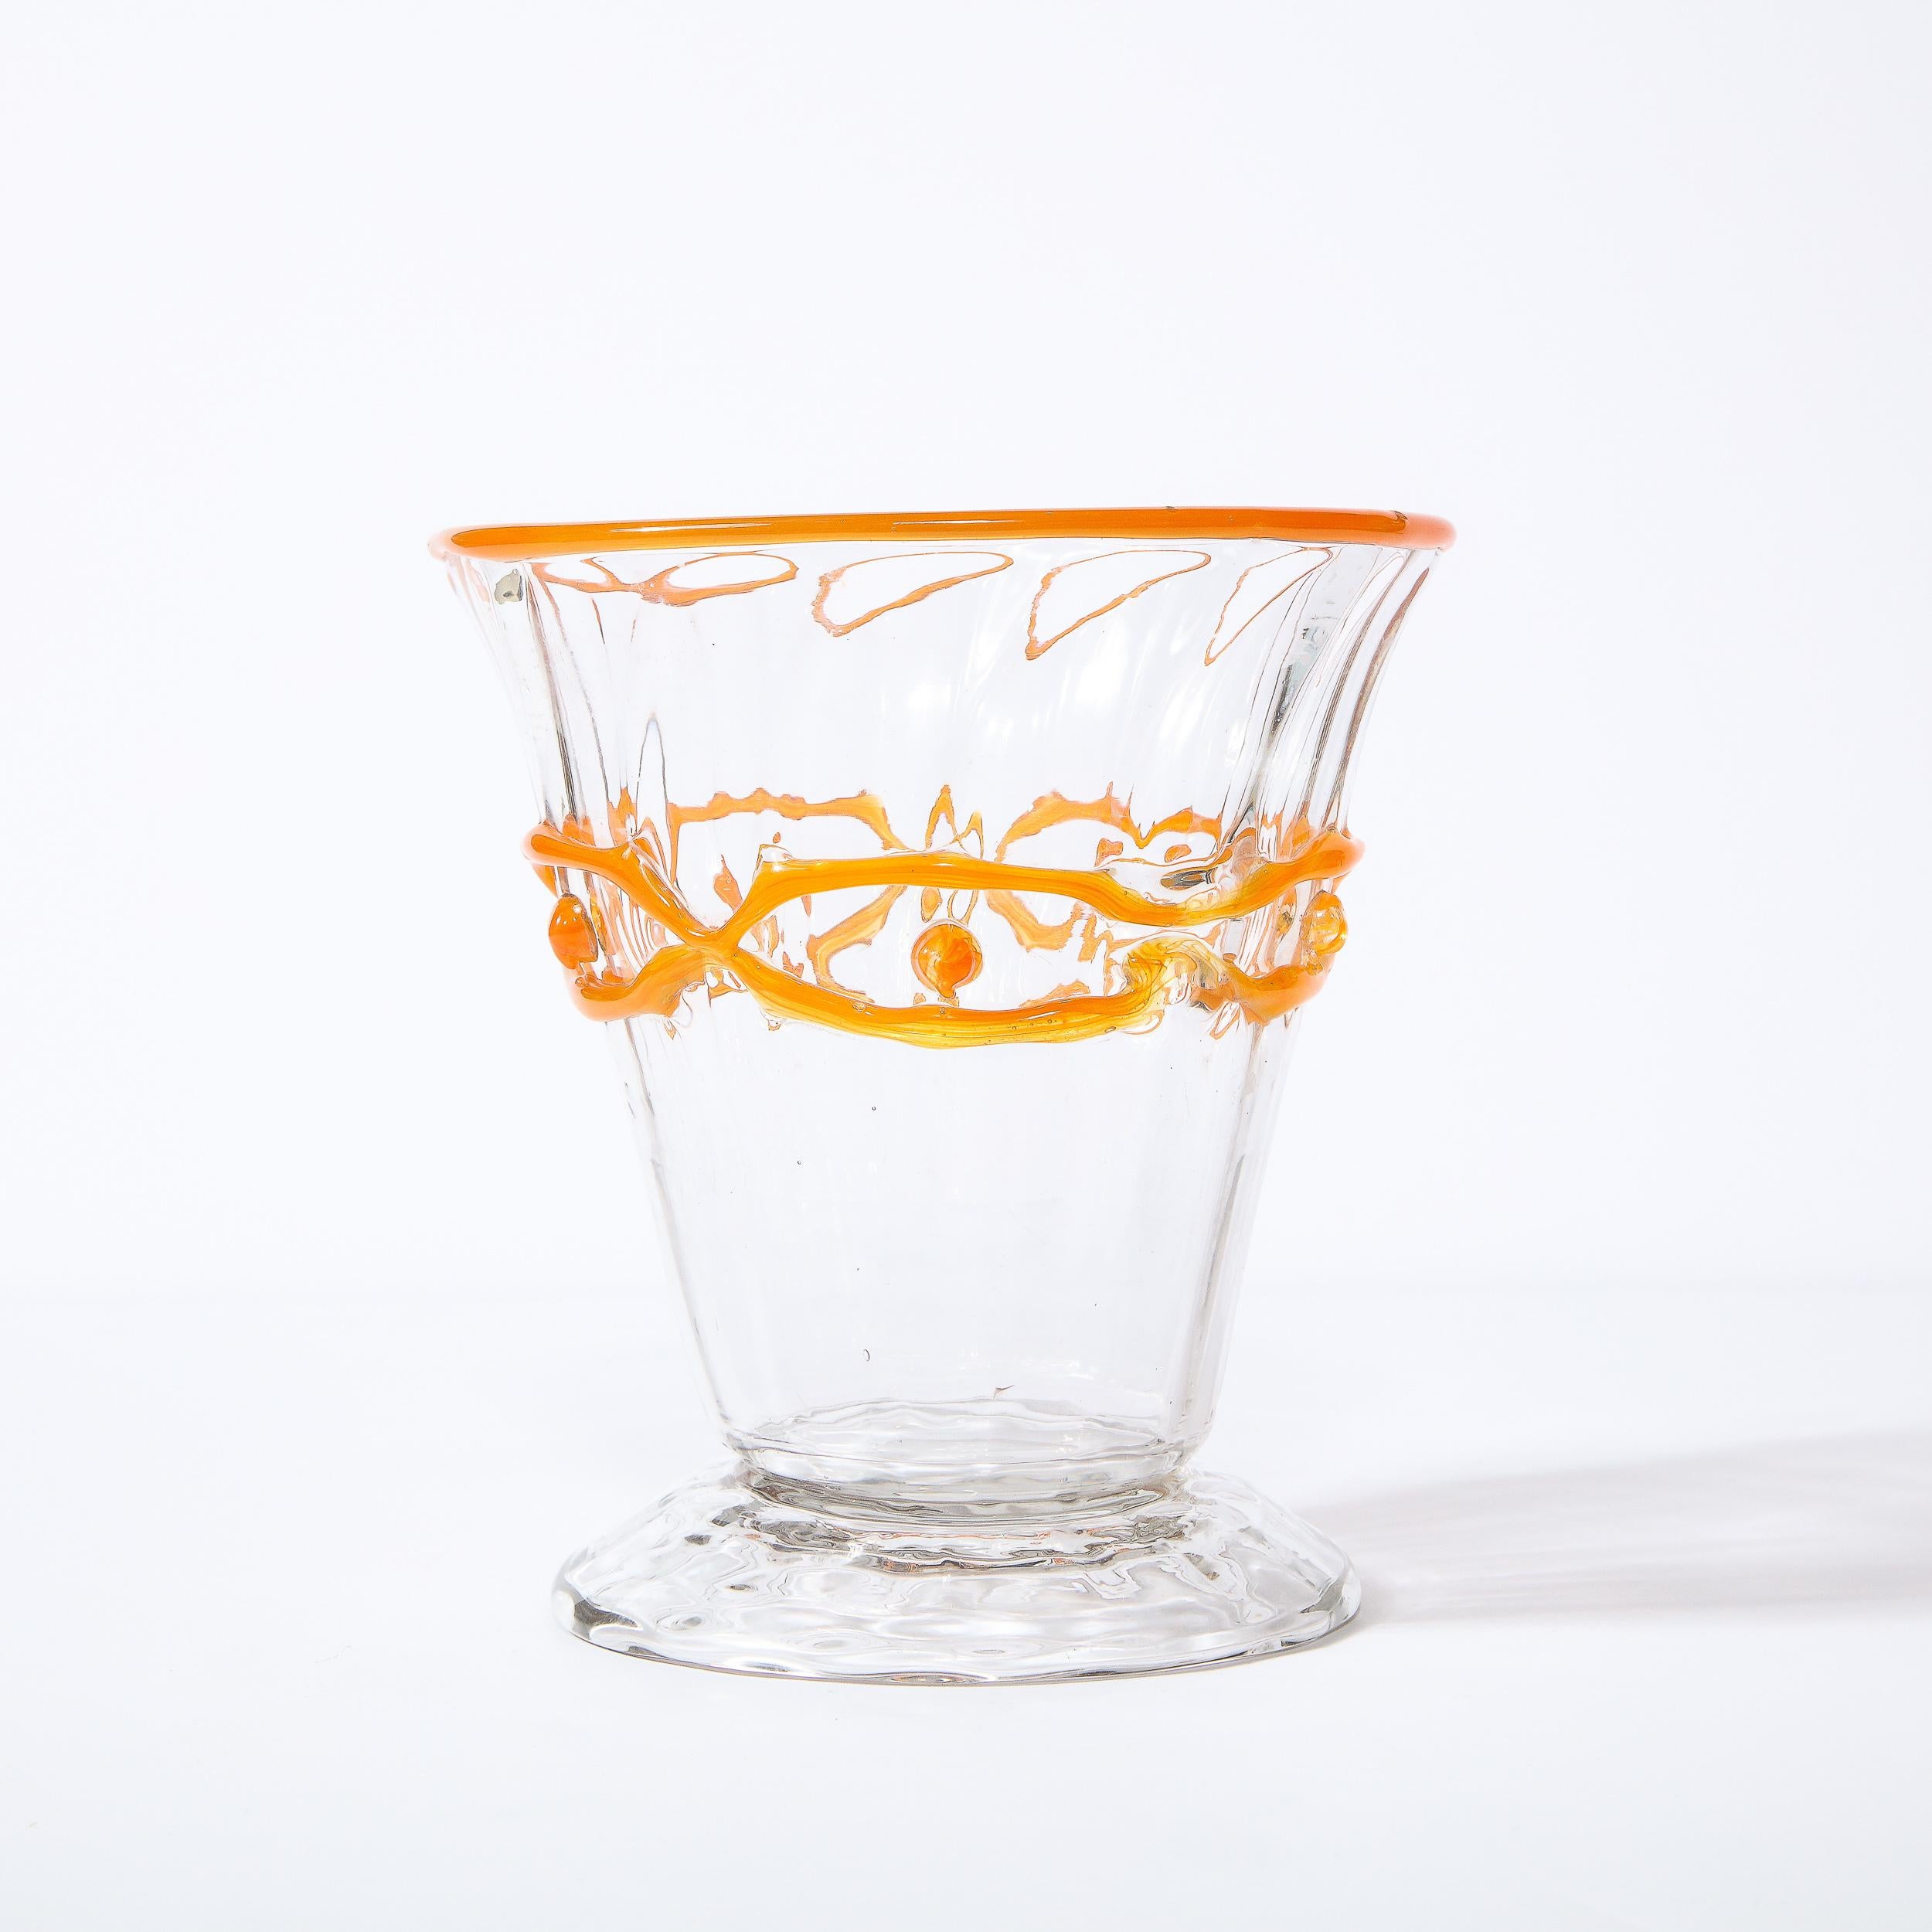 French Art Deco Translucent Glass Vase w/ Tangerine Accents in Relief Signed Daum Nancy